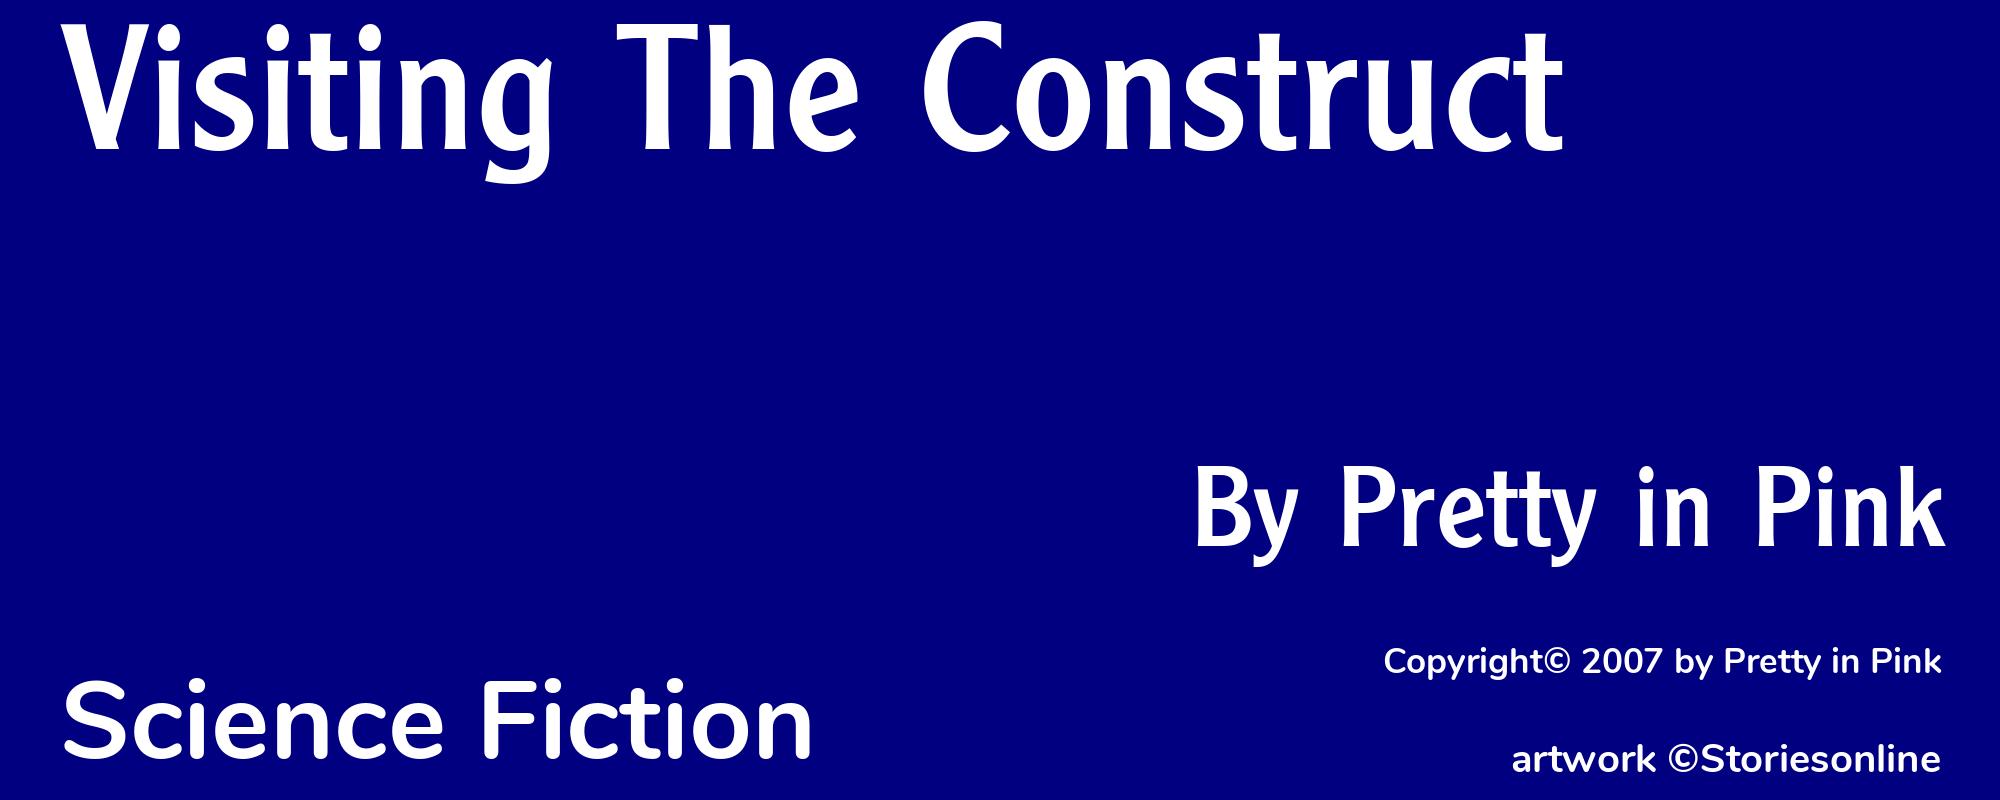 Visiting The Construct - Cover